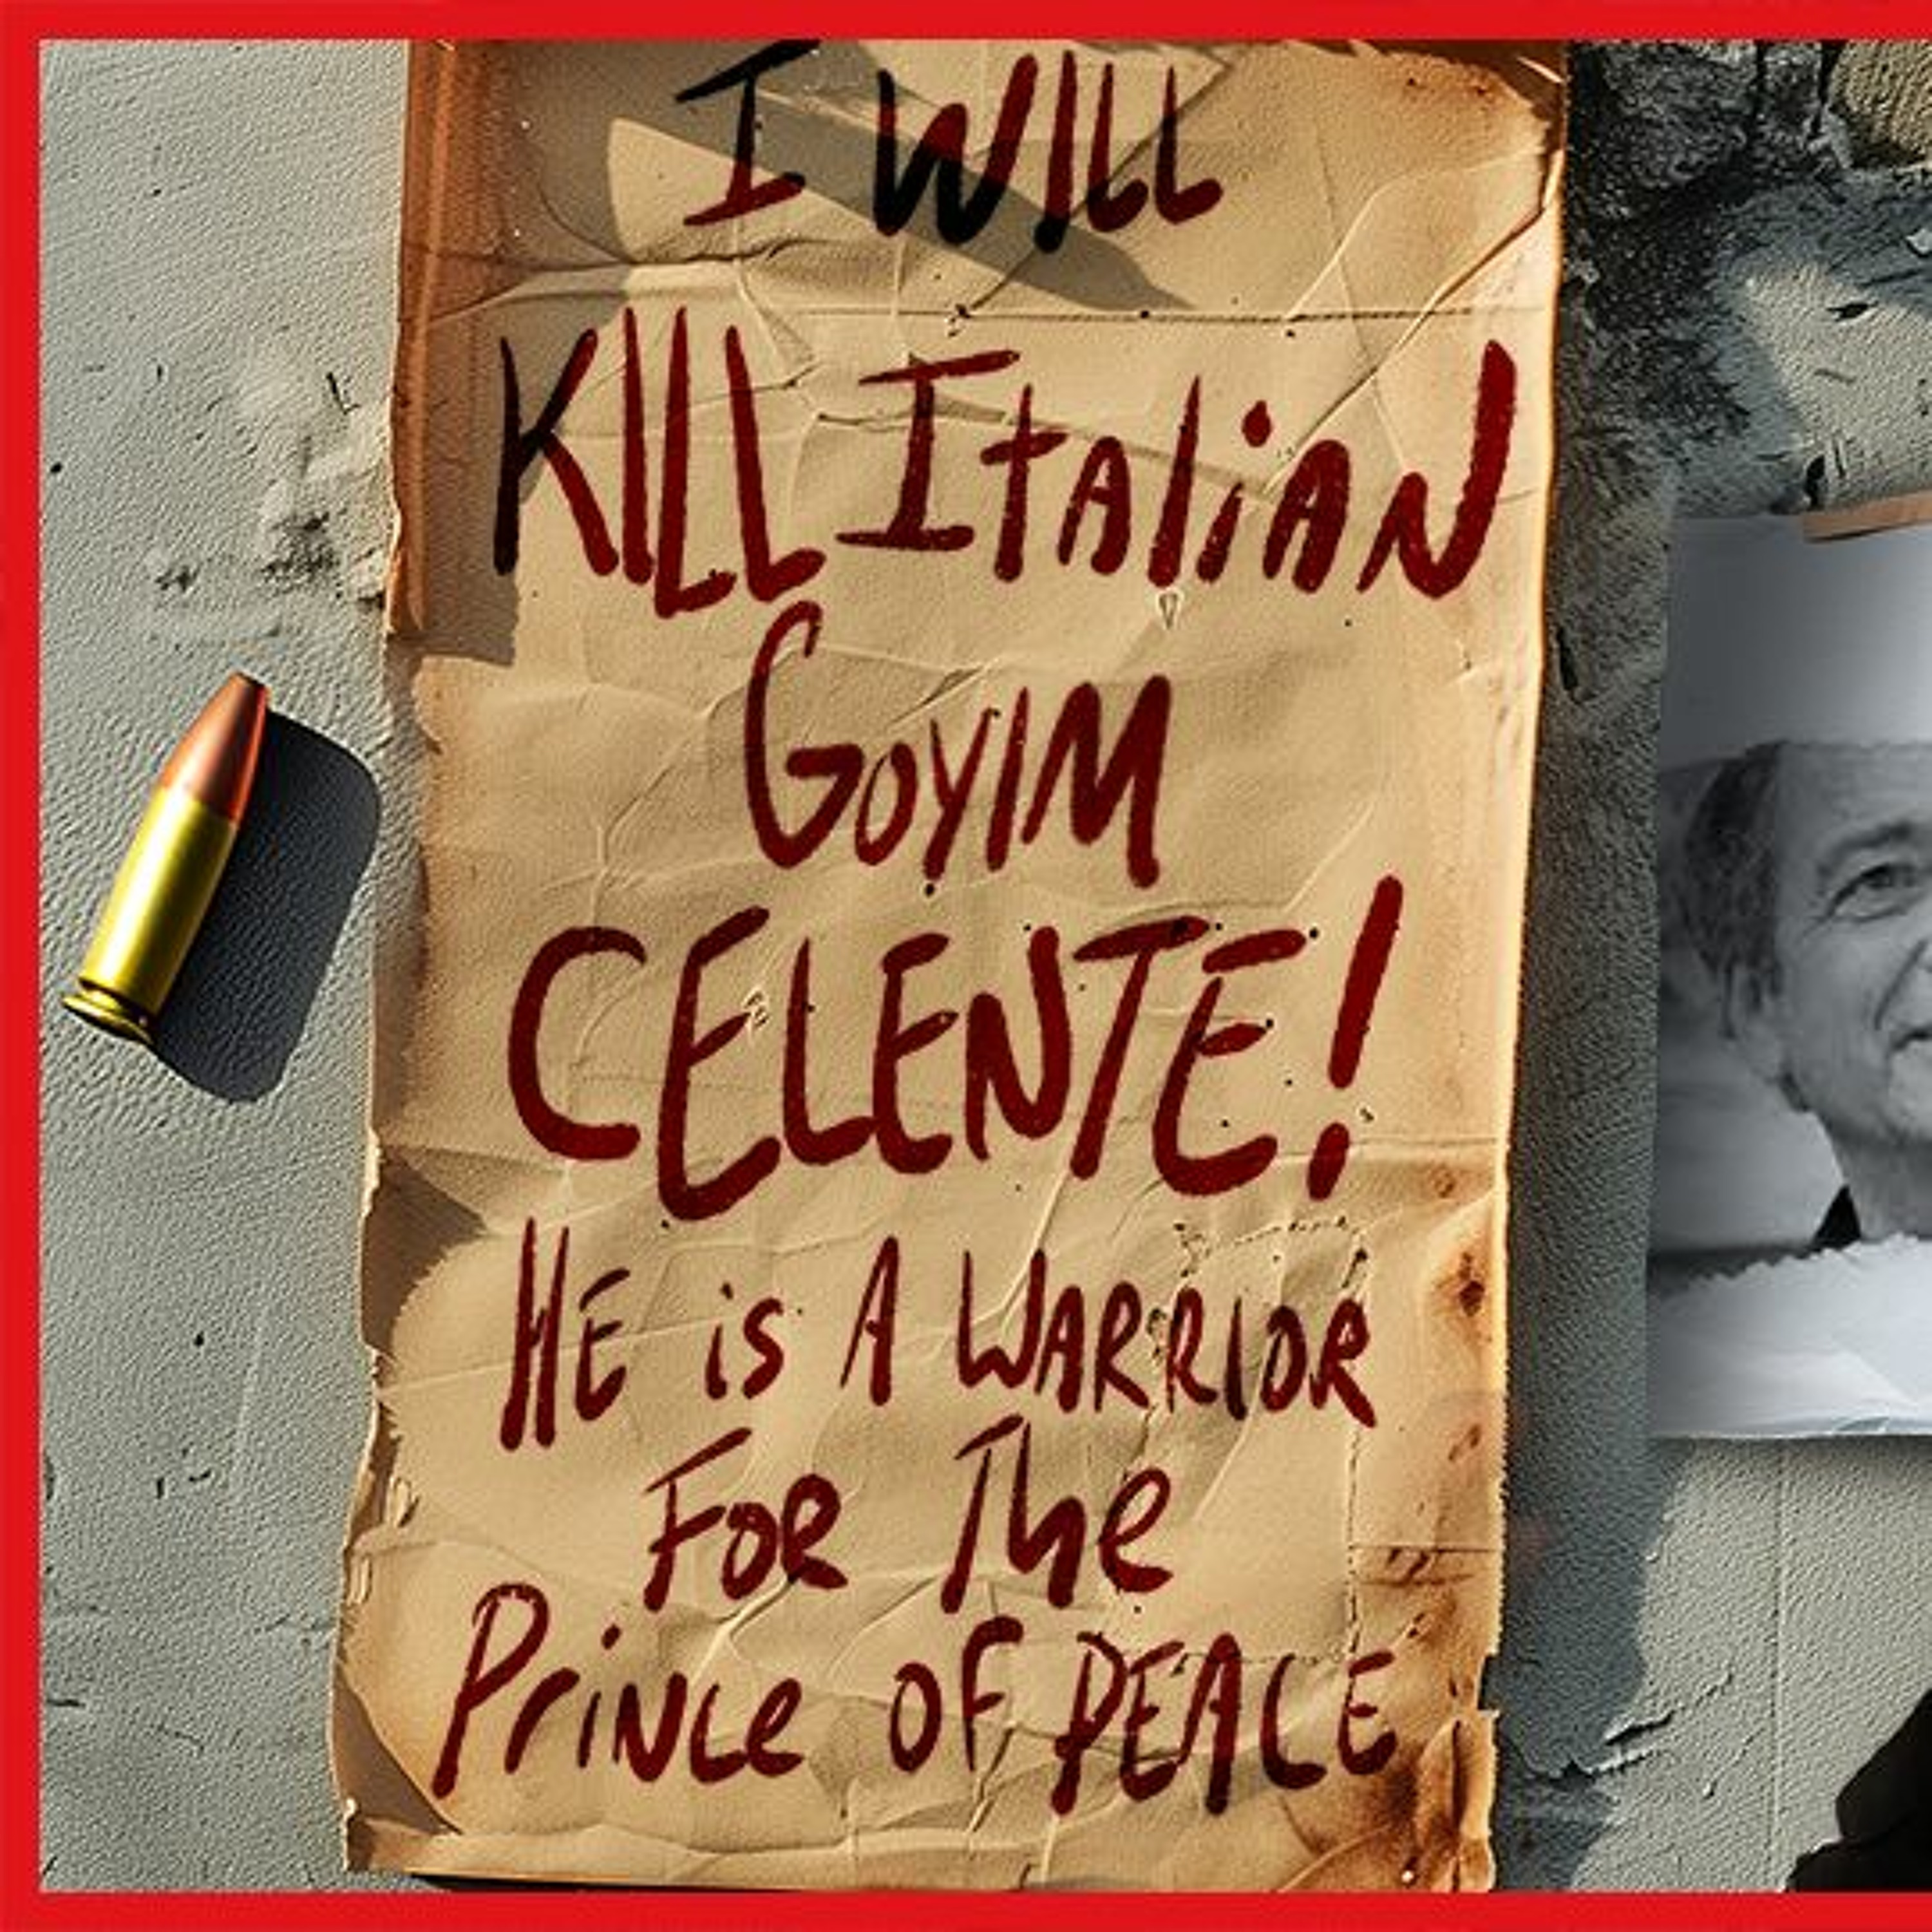 I WILL KILL CELENTE! HE'S A WARRIOR FOR THE PRINCE OF PEACE